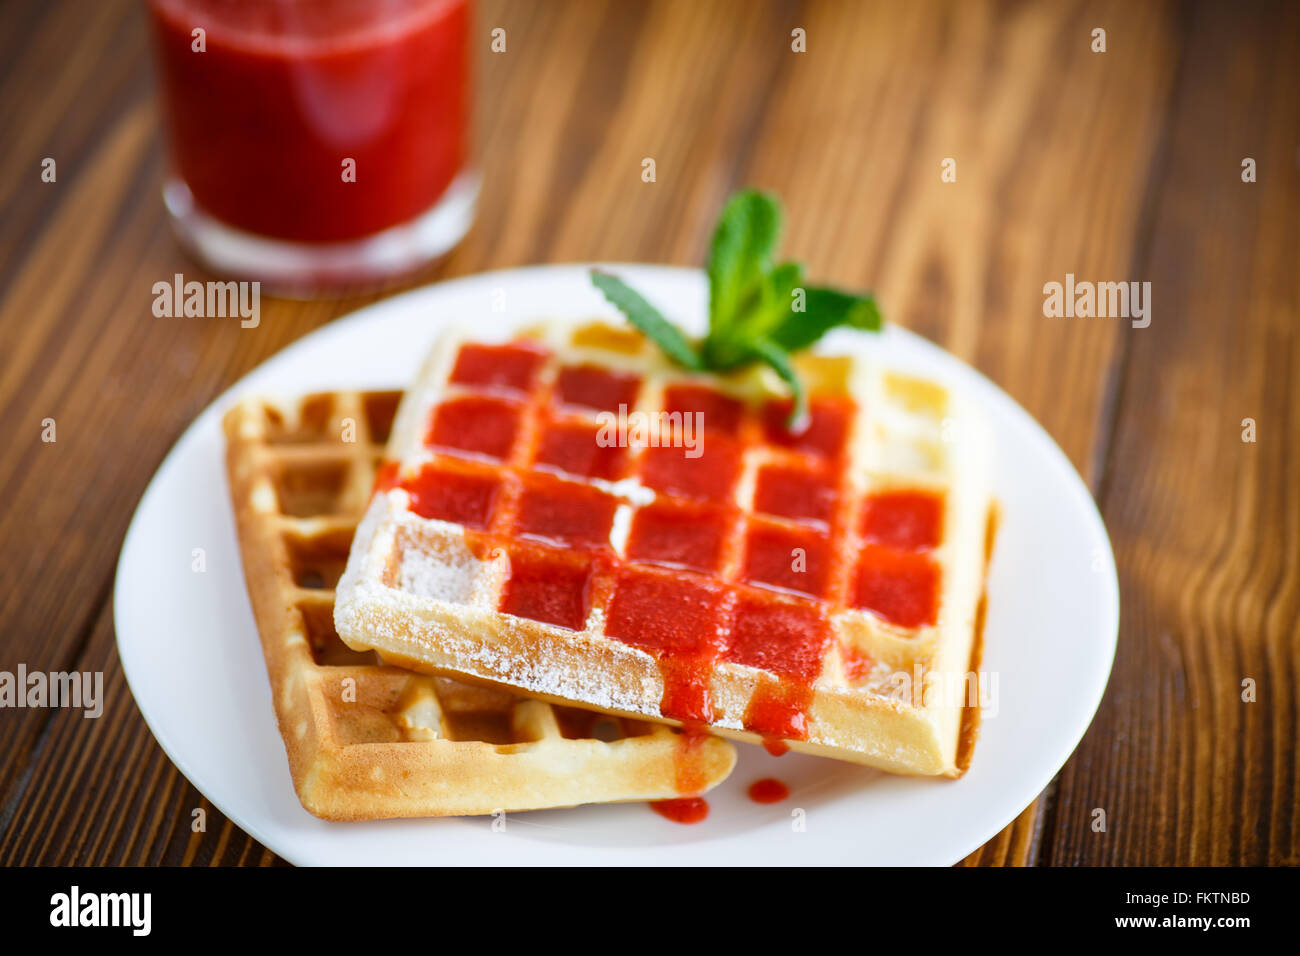 Viennese sweet waffles with strawberry jam Stock Photo